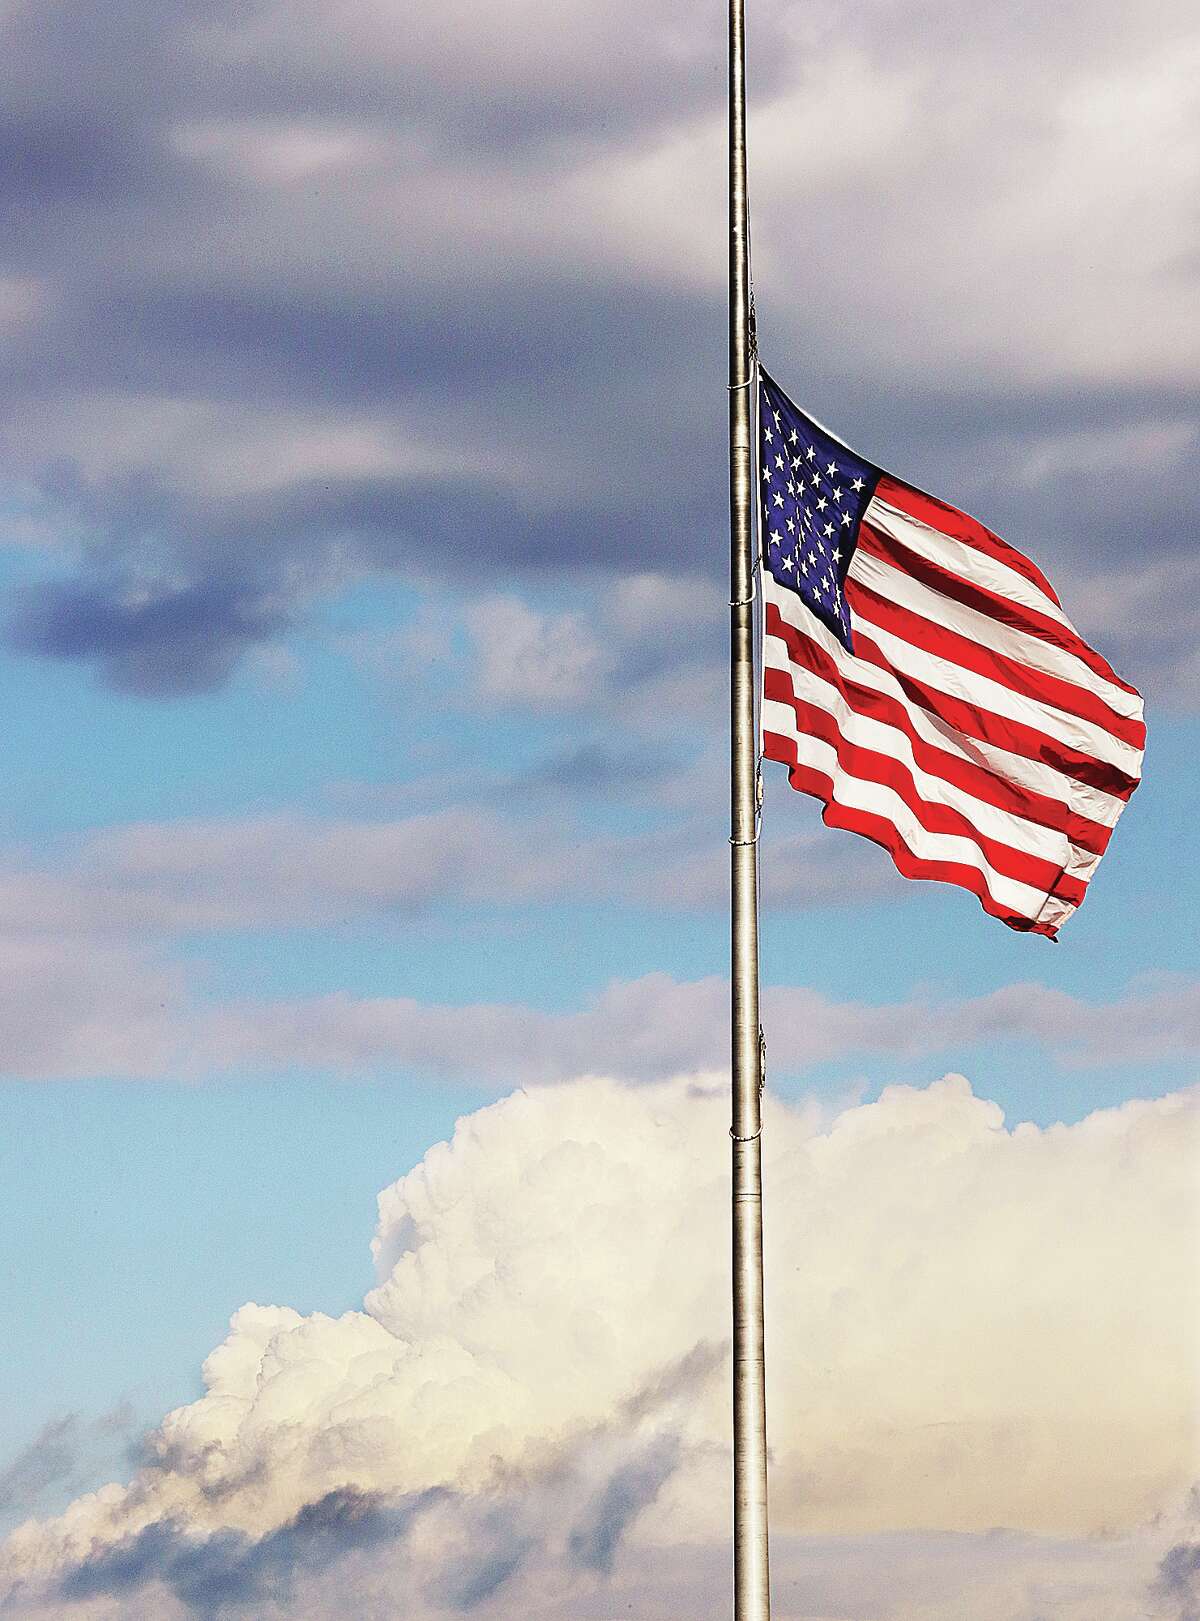 The large American flag at Roberts Motors on Alby Street in Alton, was at half staff Thursday, flapping in a steady breeze. Many flags in the area have been lowered in honor of the 19 students and two adults killed this week in the elementary school shooting in Uvalde, Texas.